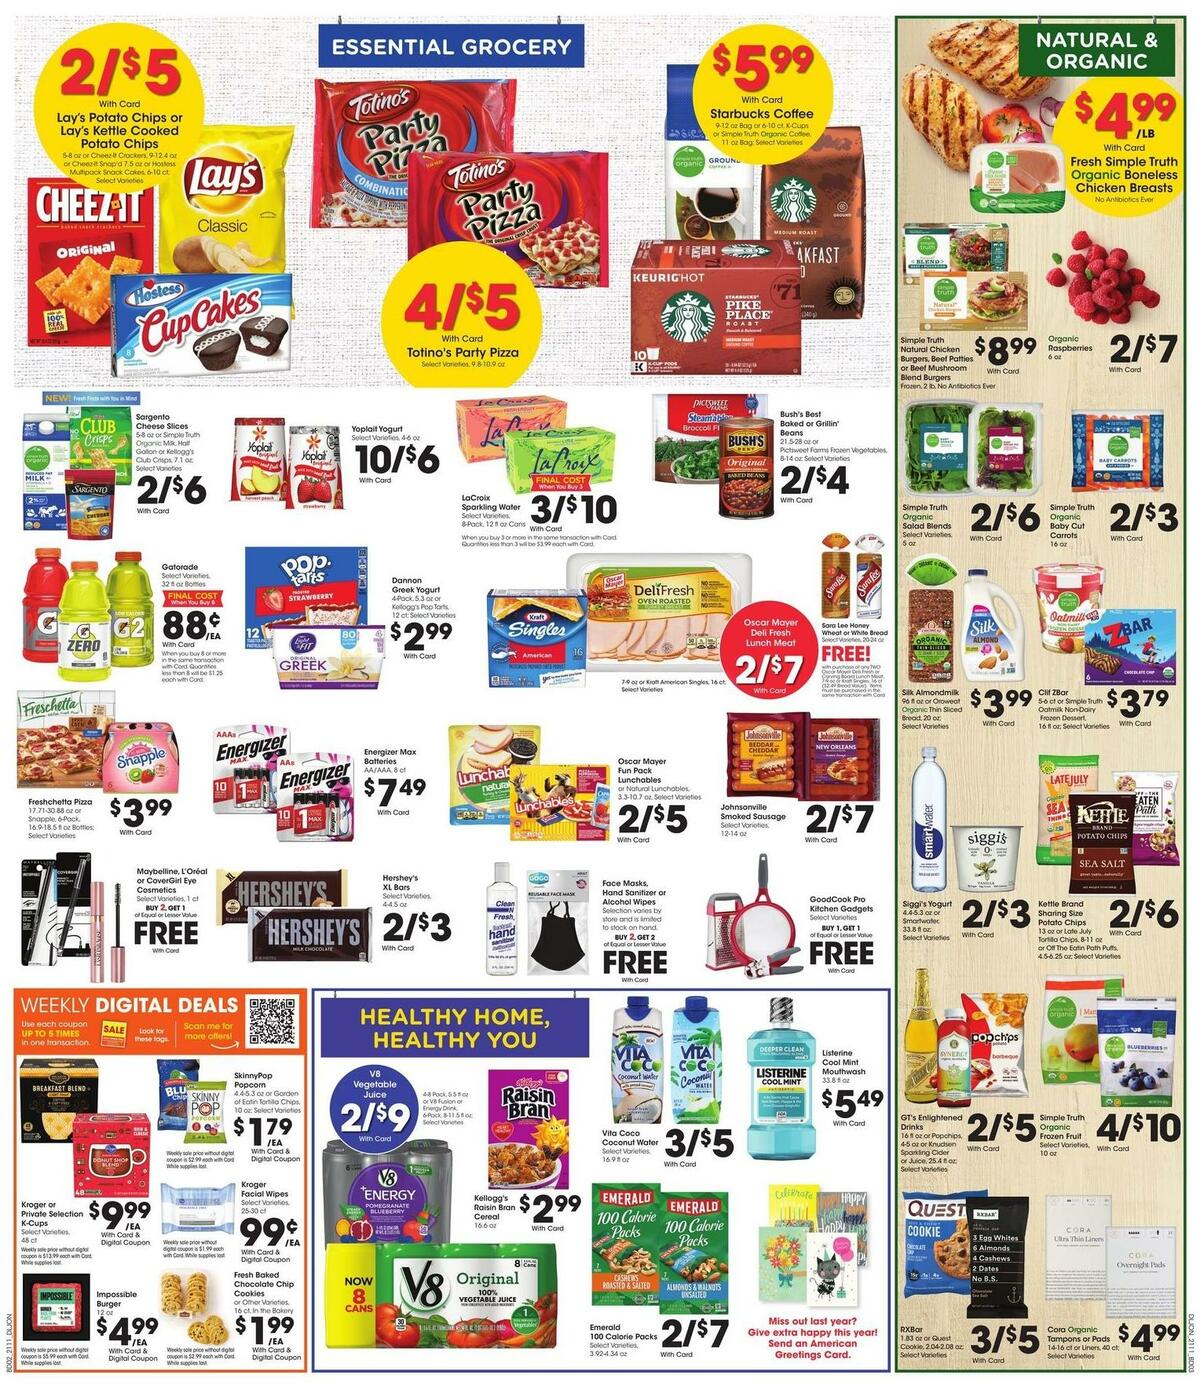 Kroger Weekly Ad from April 14